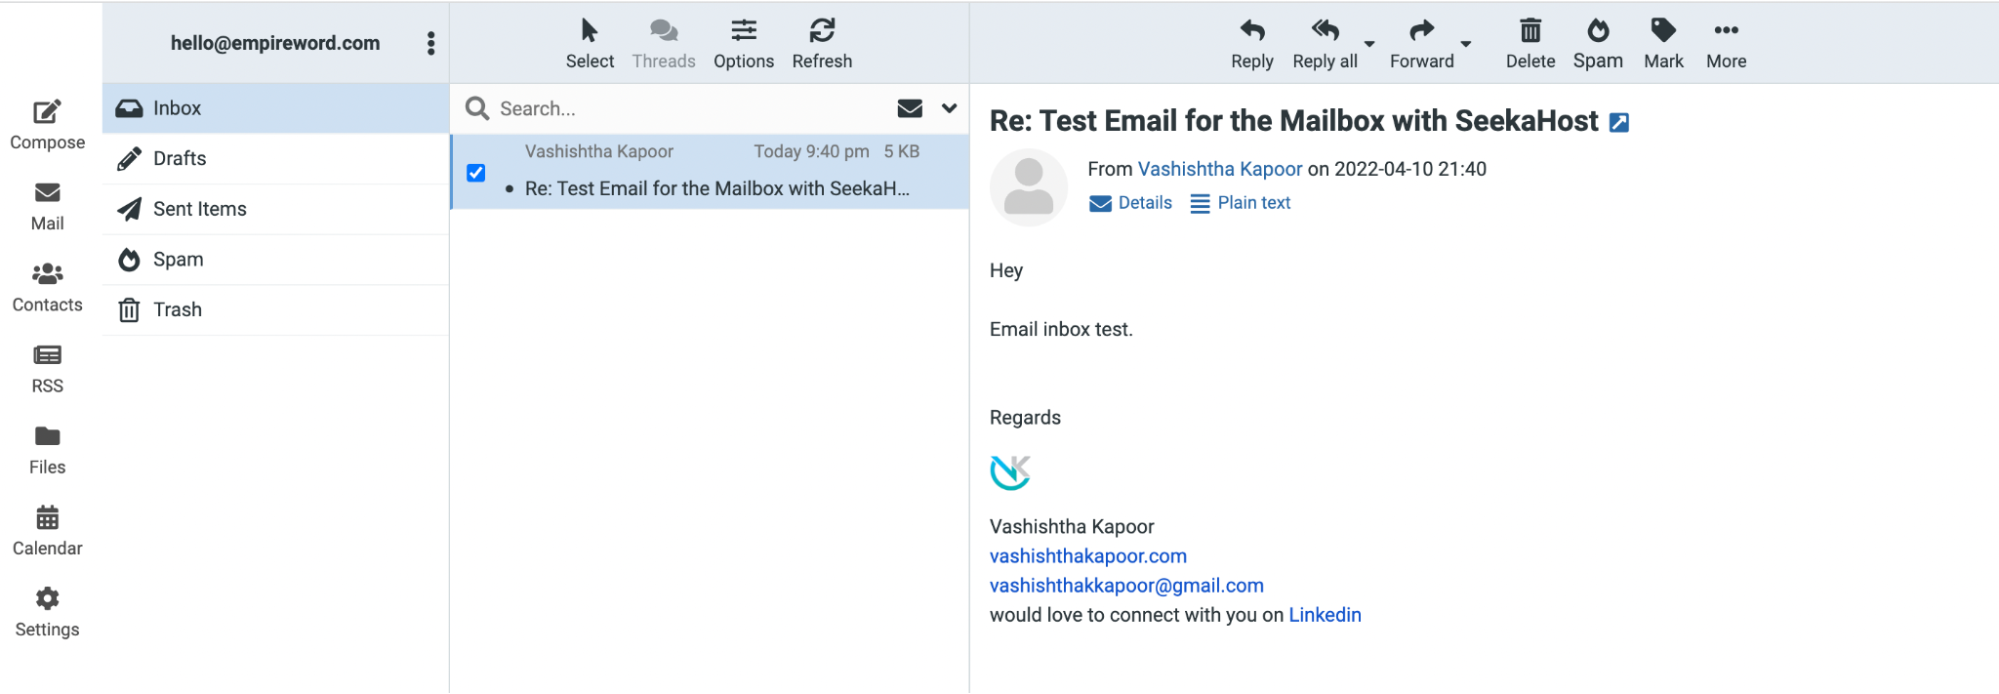 seekahost email testing done